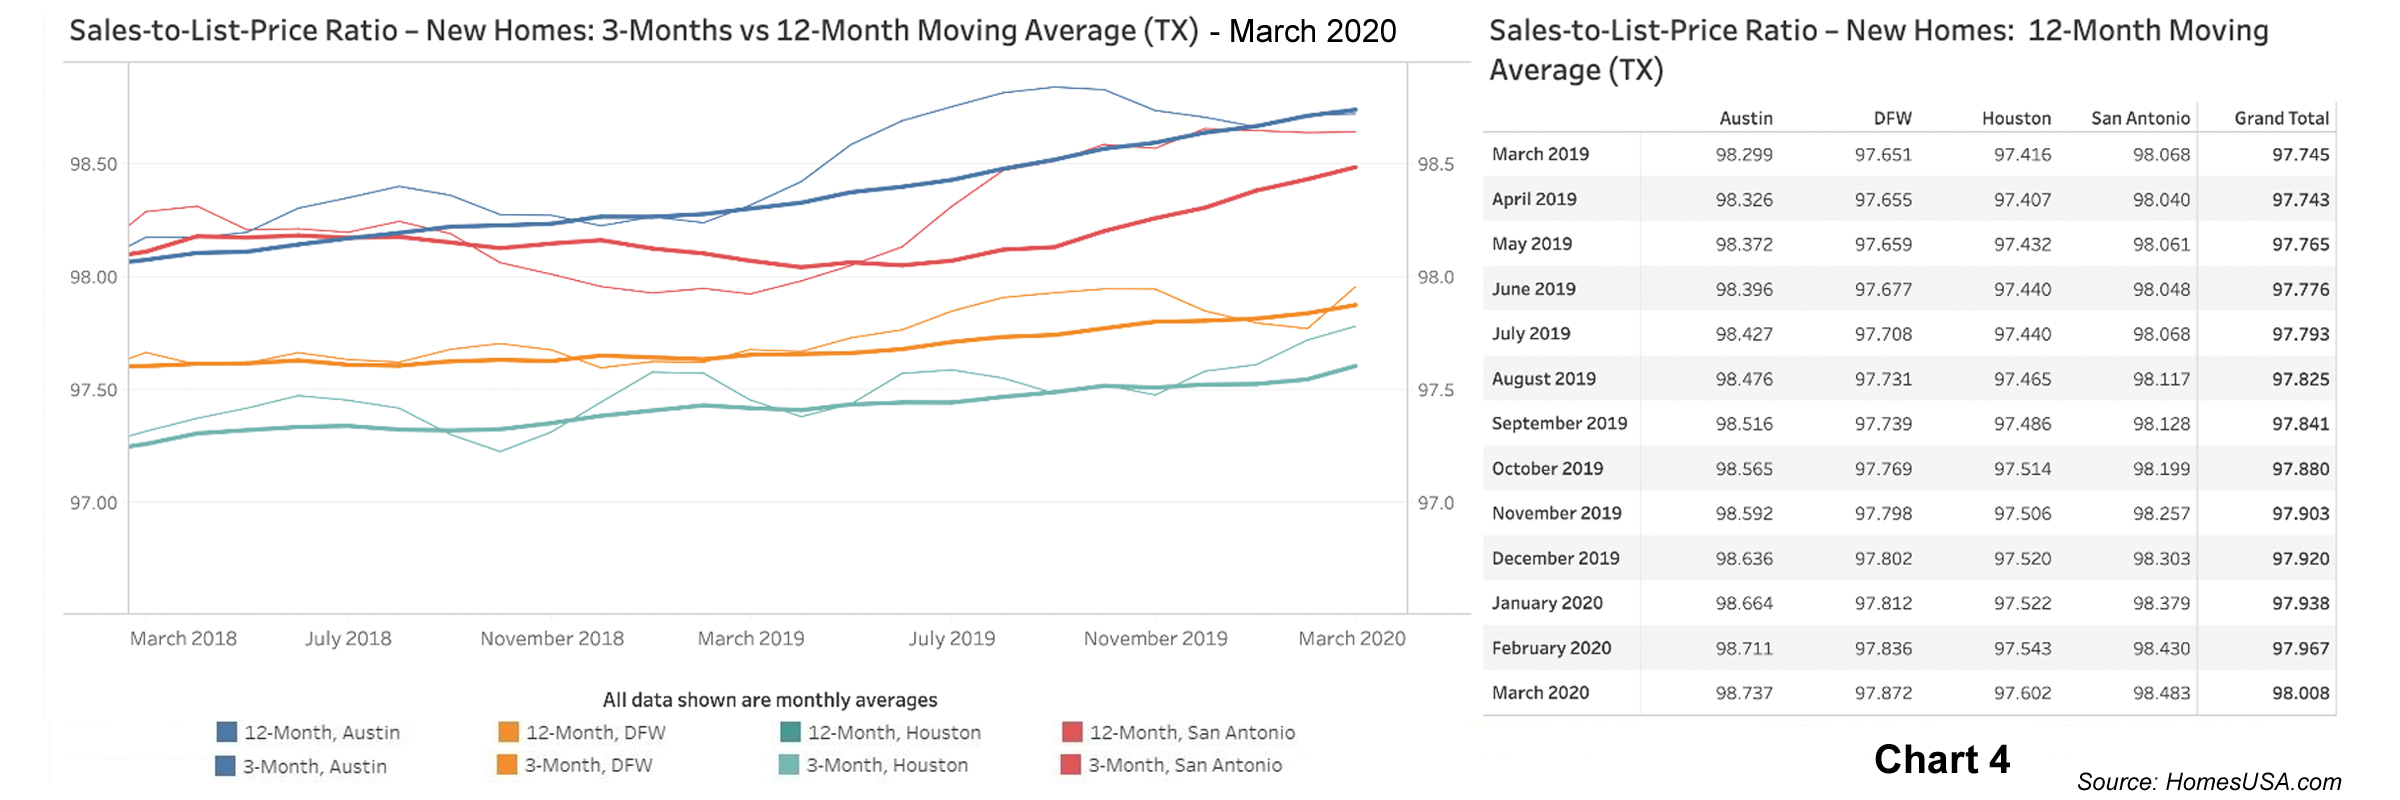 Chart 4: Sales-to-List-Price Ratio Data for Texas New Homes